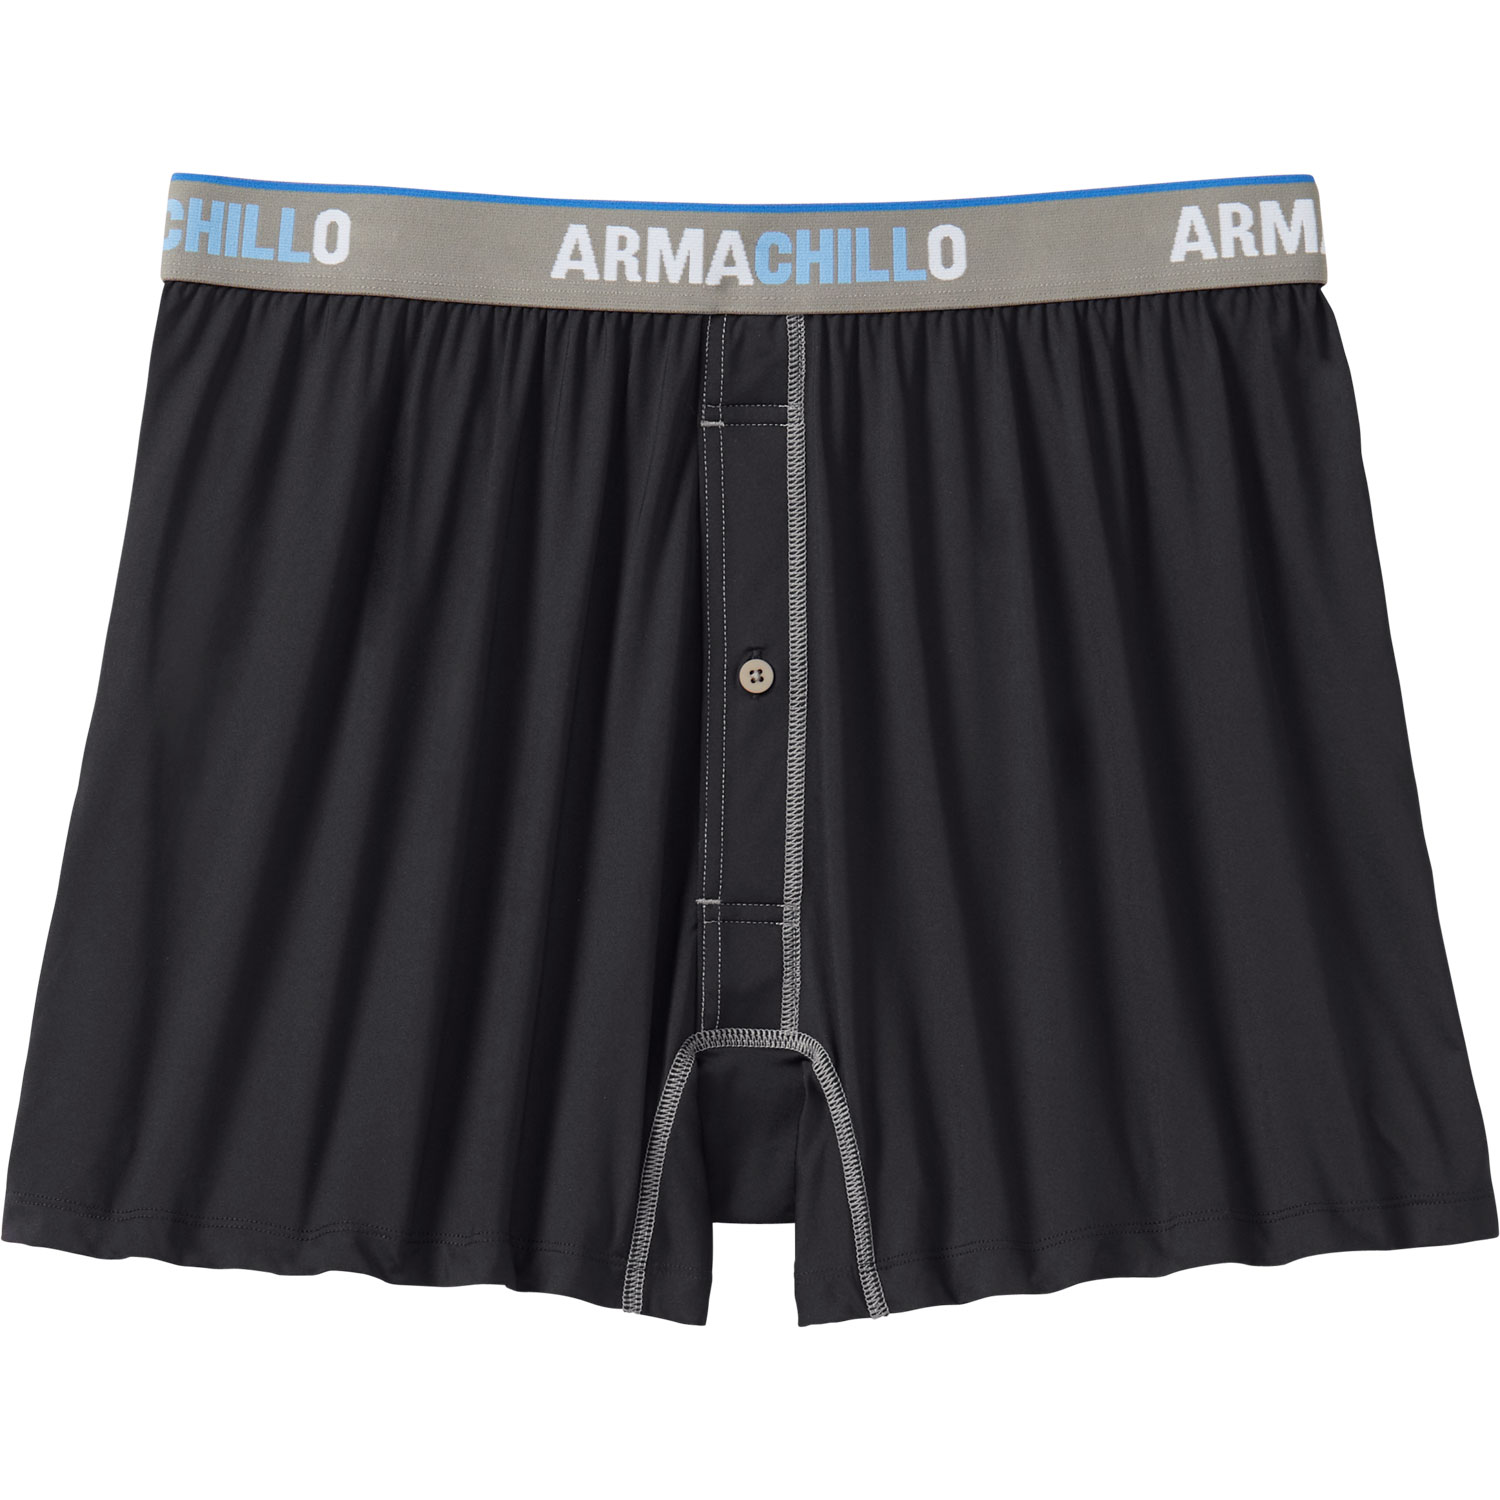 Duluth Trading Co Mens Armachillo Cooling Bullpen Boxer Briefs in Claret  72267 